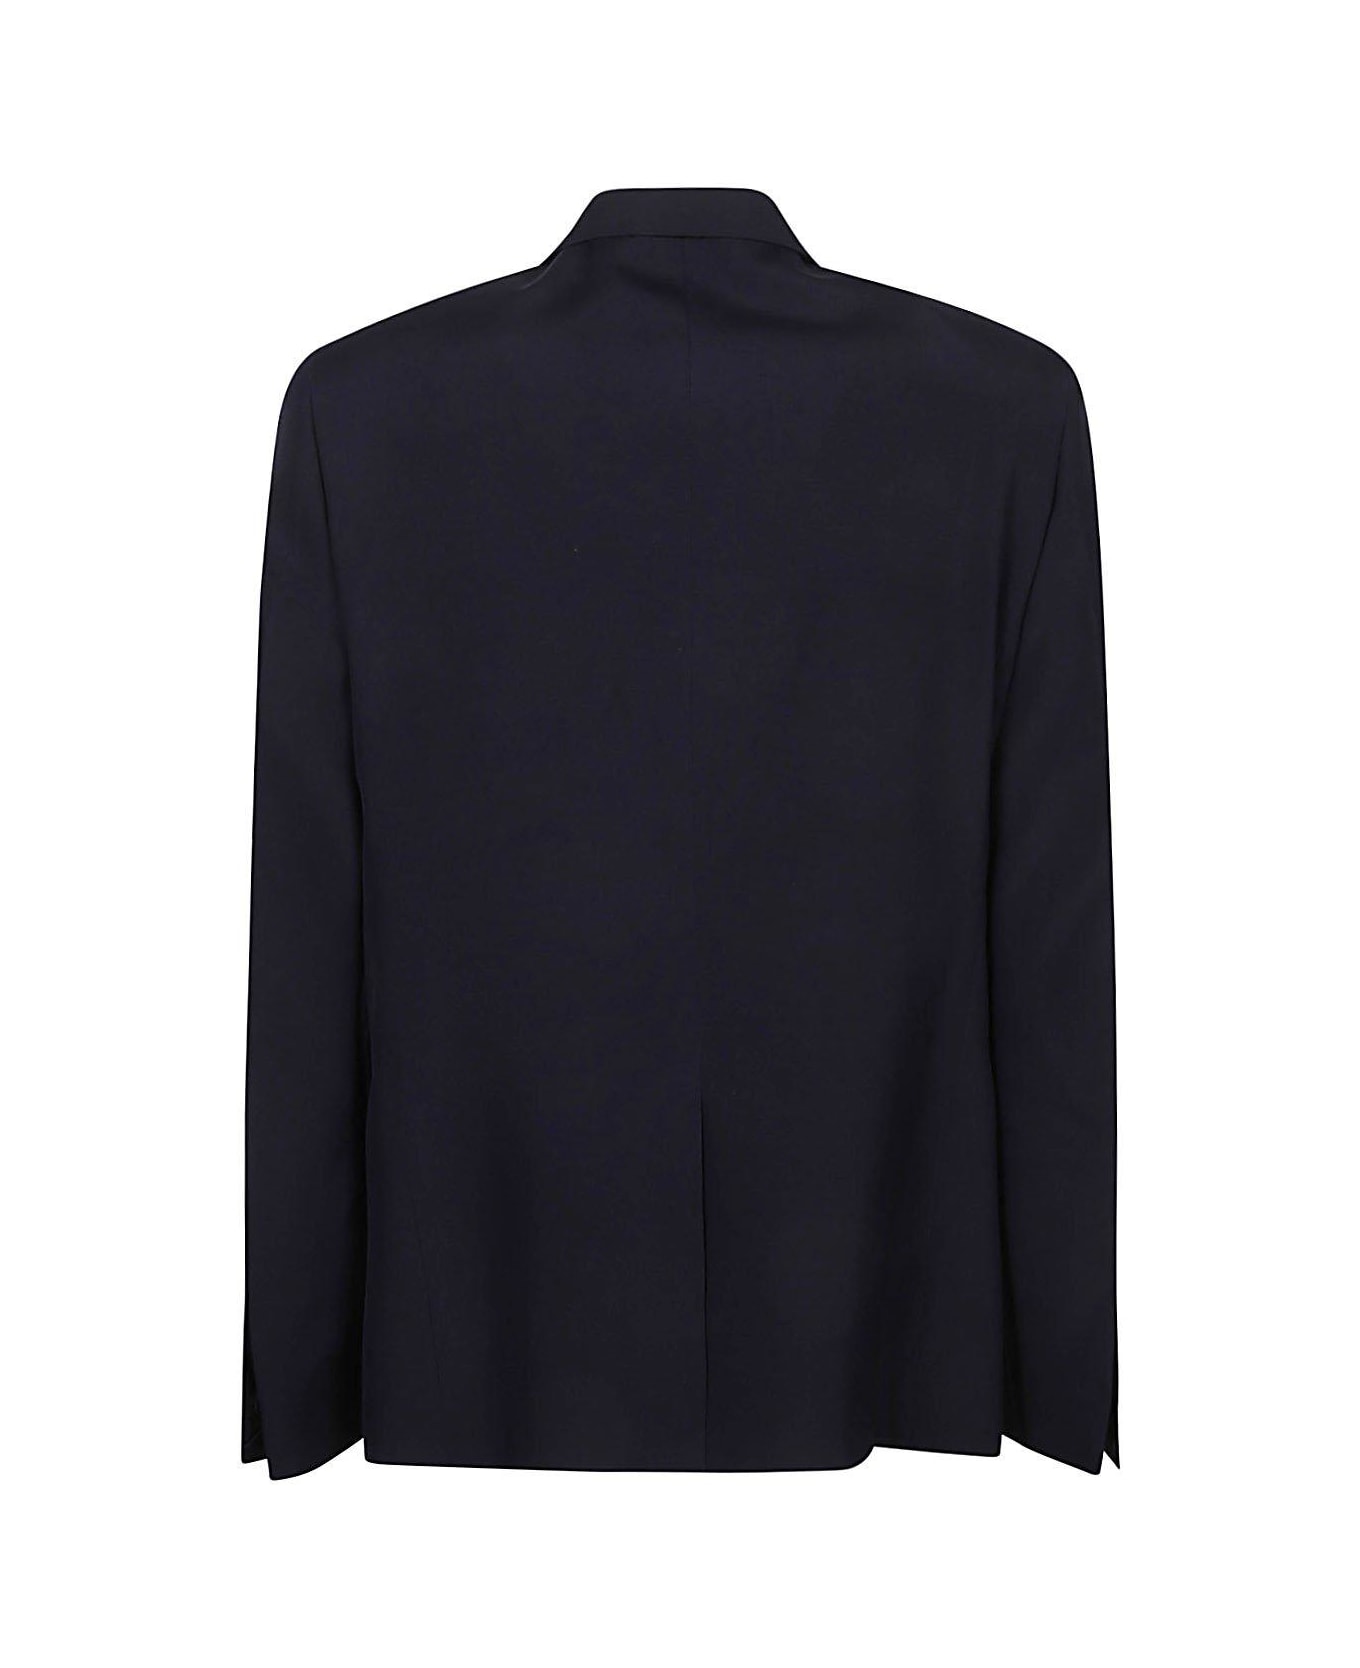 Givenchy Slim-fit Buttoned Jacket - NAVY